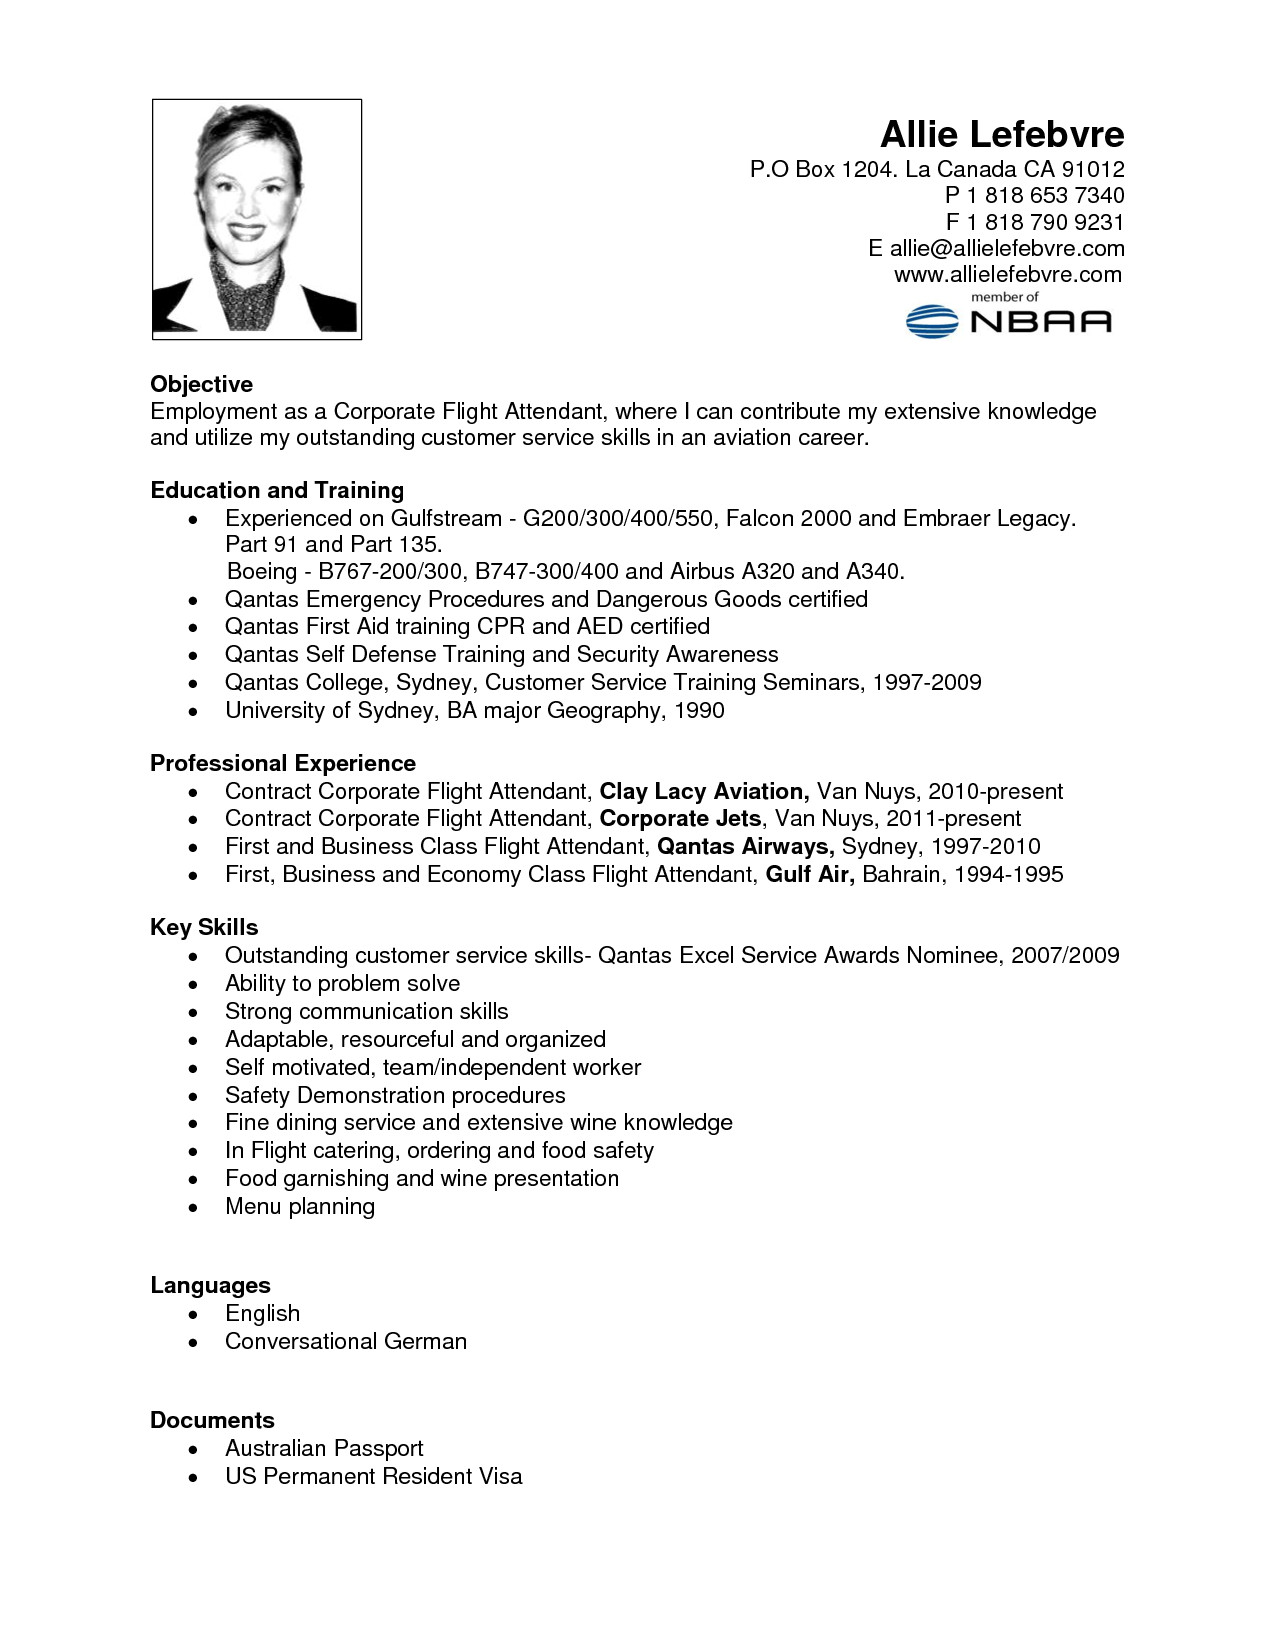 Resume Flight Attendant Without Experience Resume Ideas